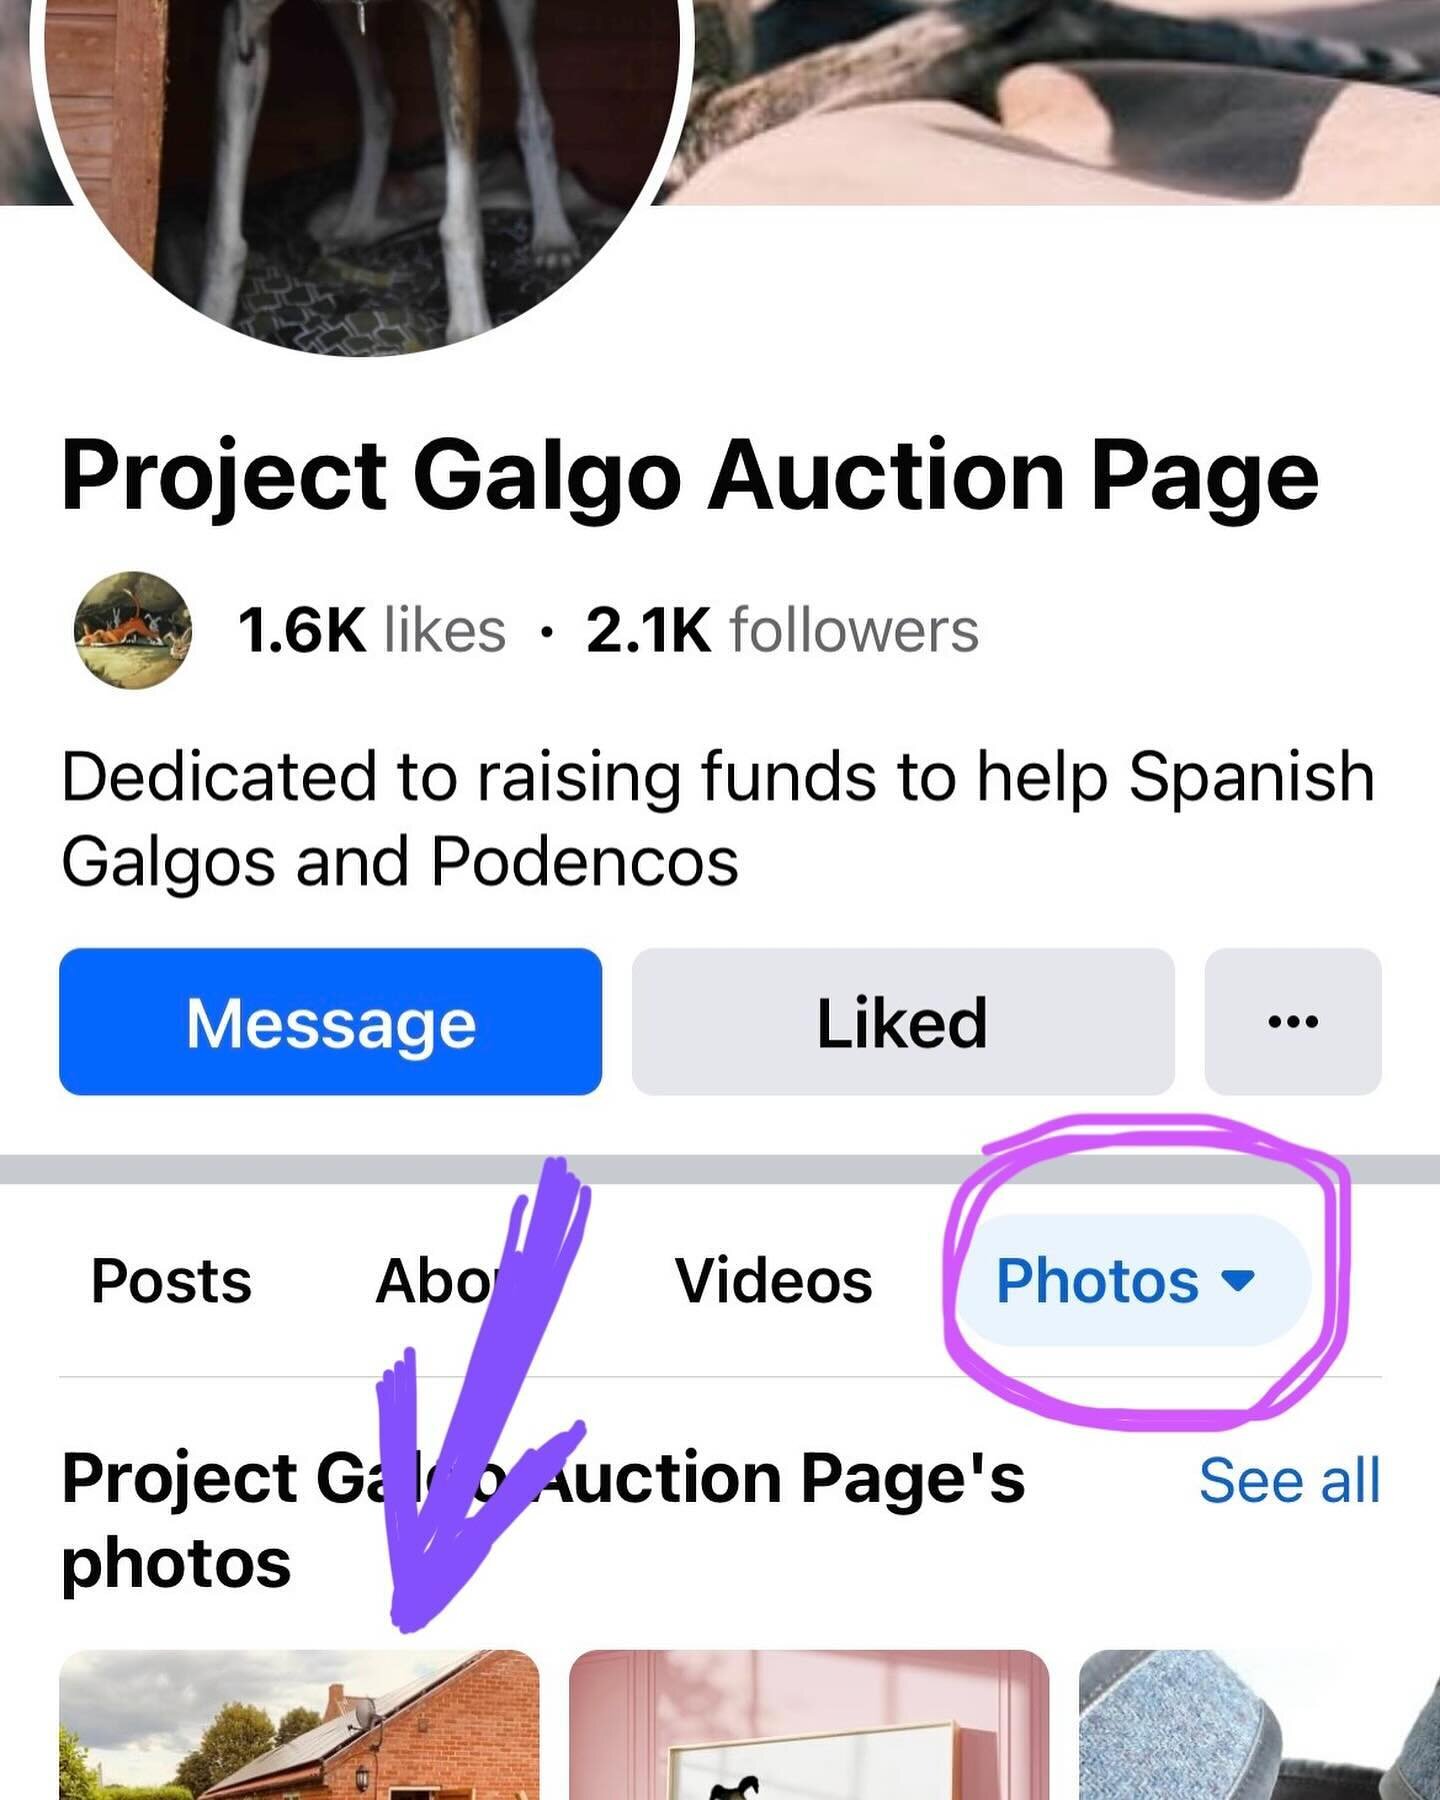 Greetings sighthound lovers!
Project Galgo has a fundraising auction in progress (on Facebook), and the items that are available for bidding are amazing!

Two of my prints are up for auction, but you should really check out the incredible selection f